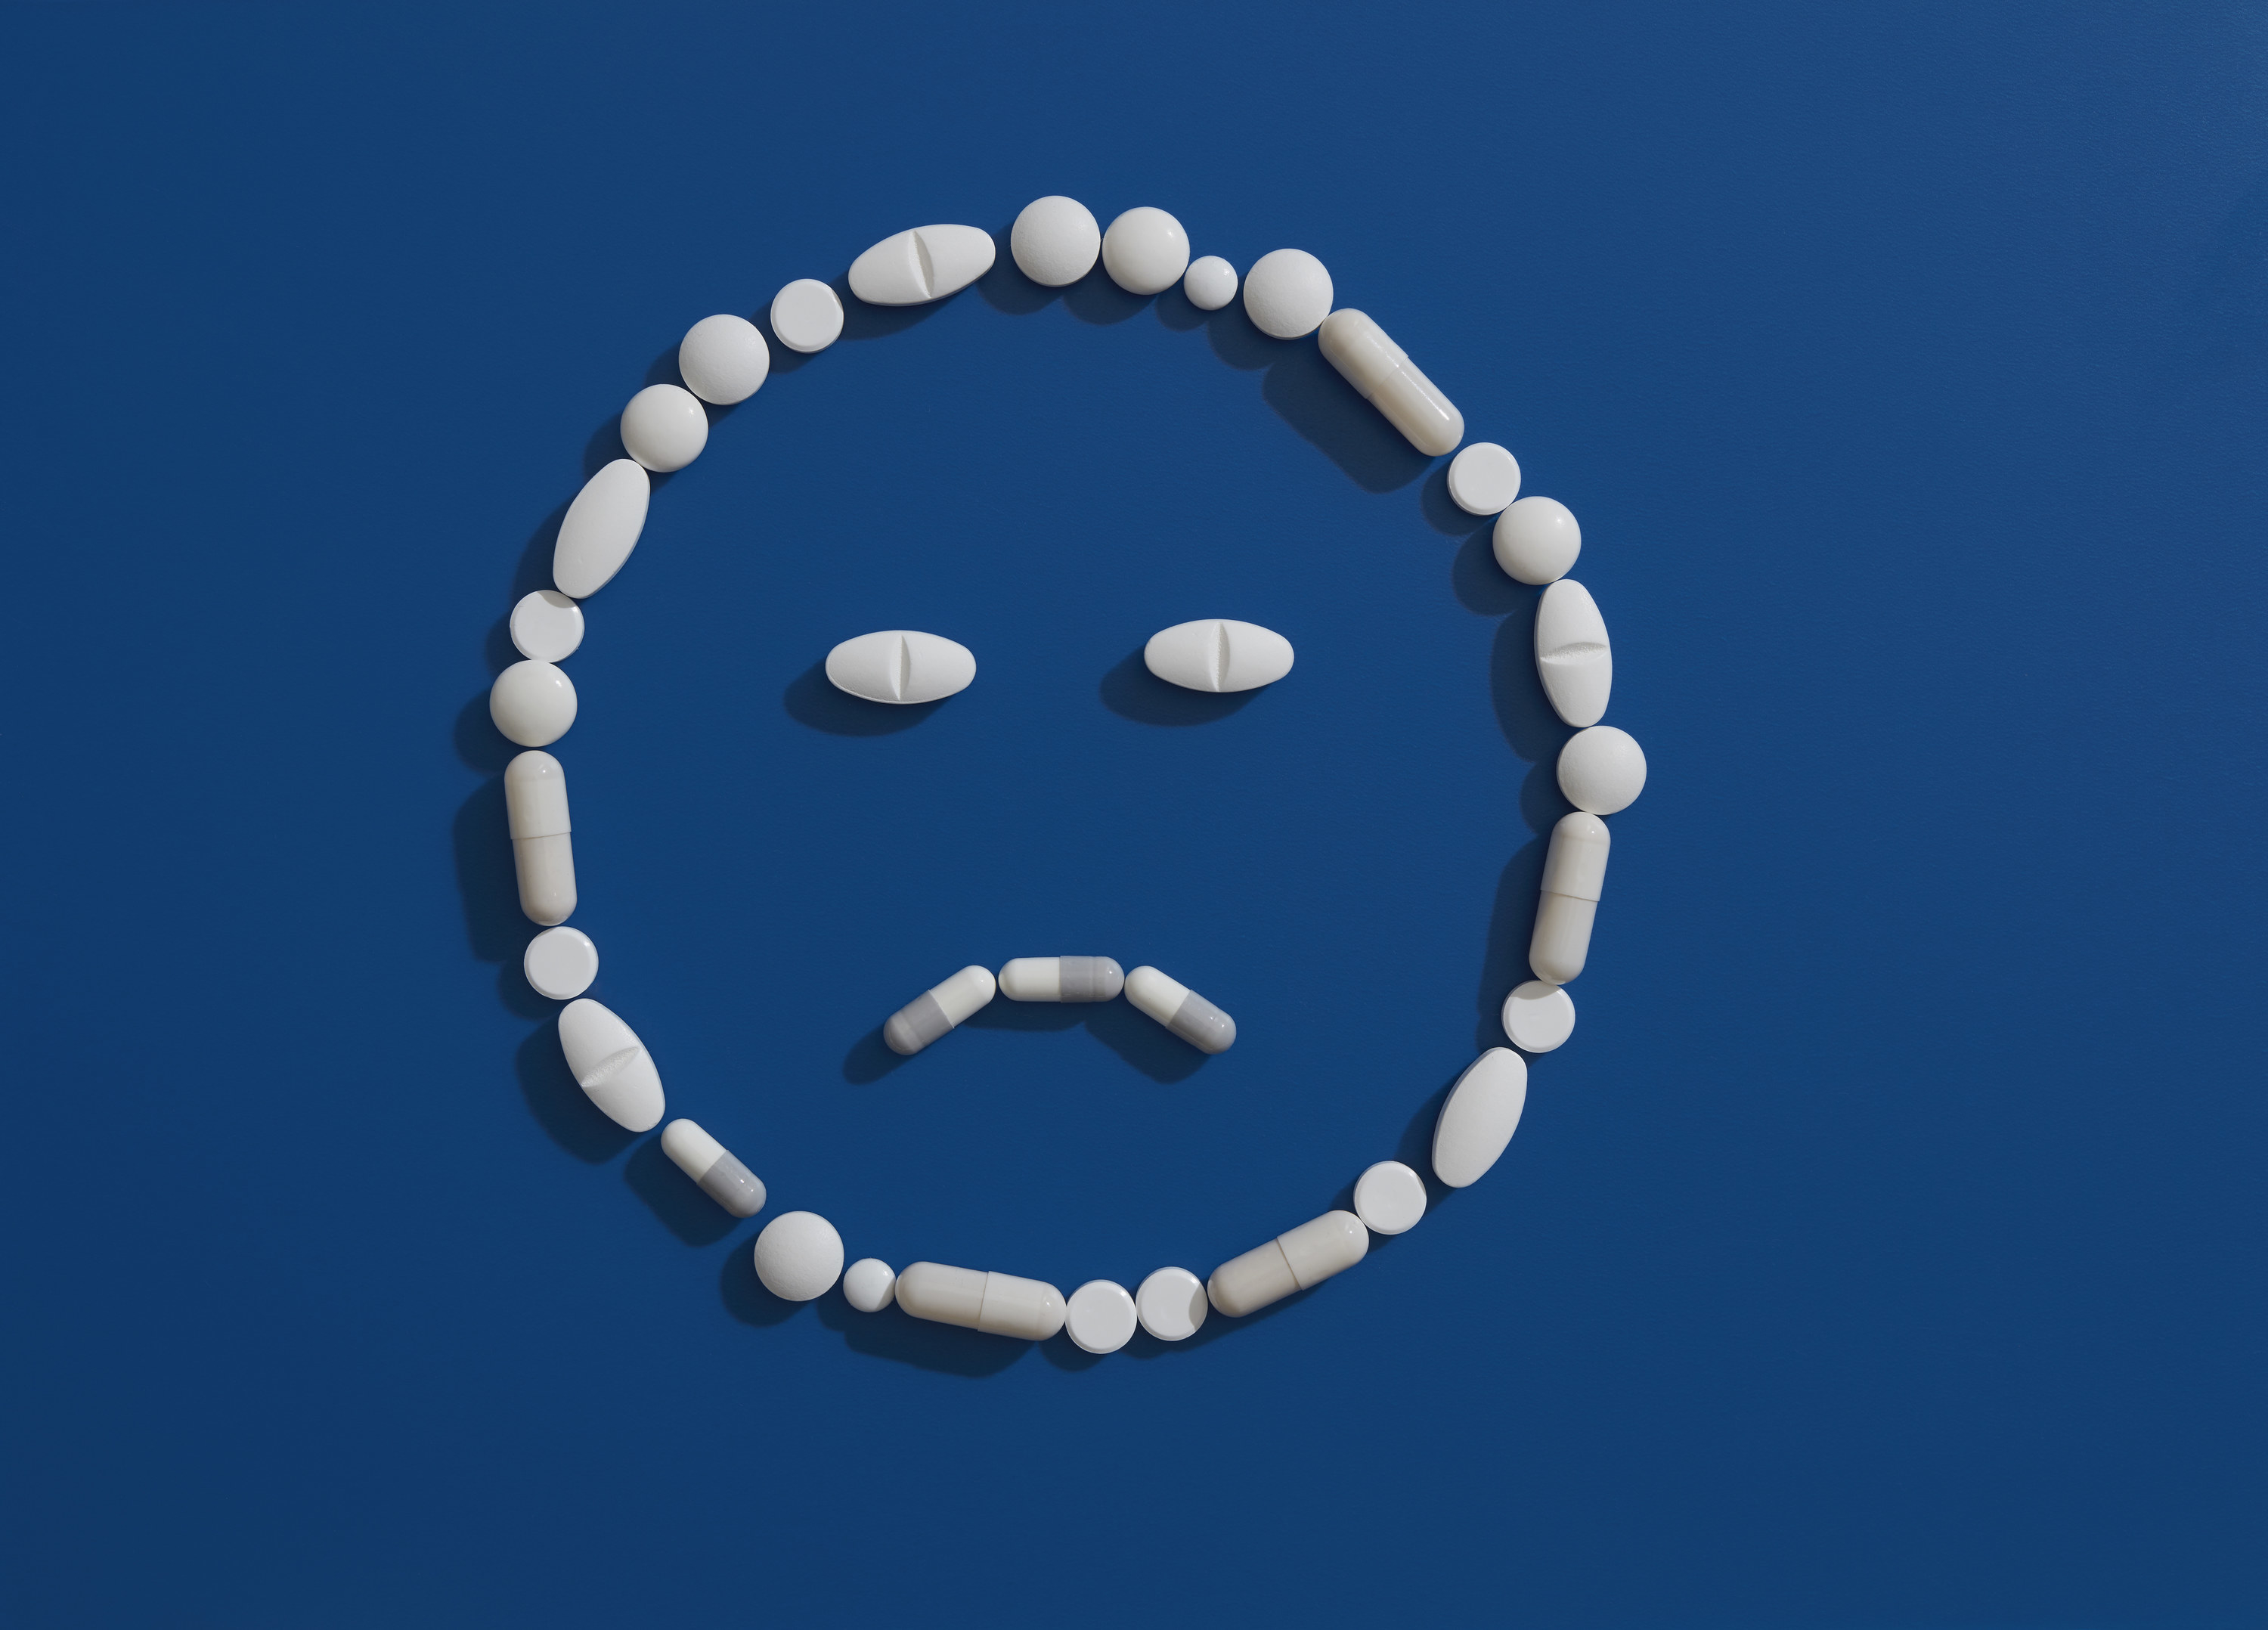 An image of pills on a blue background forming the shape of a sad face emoji